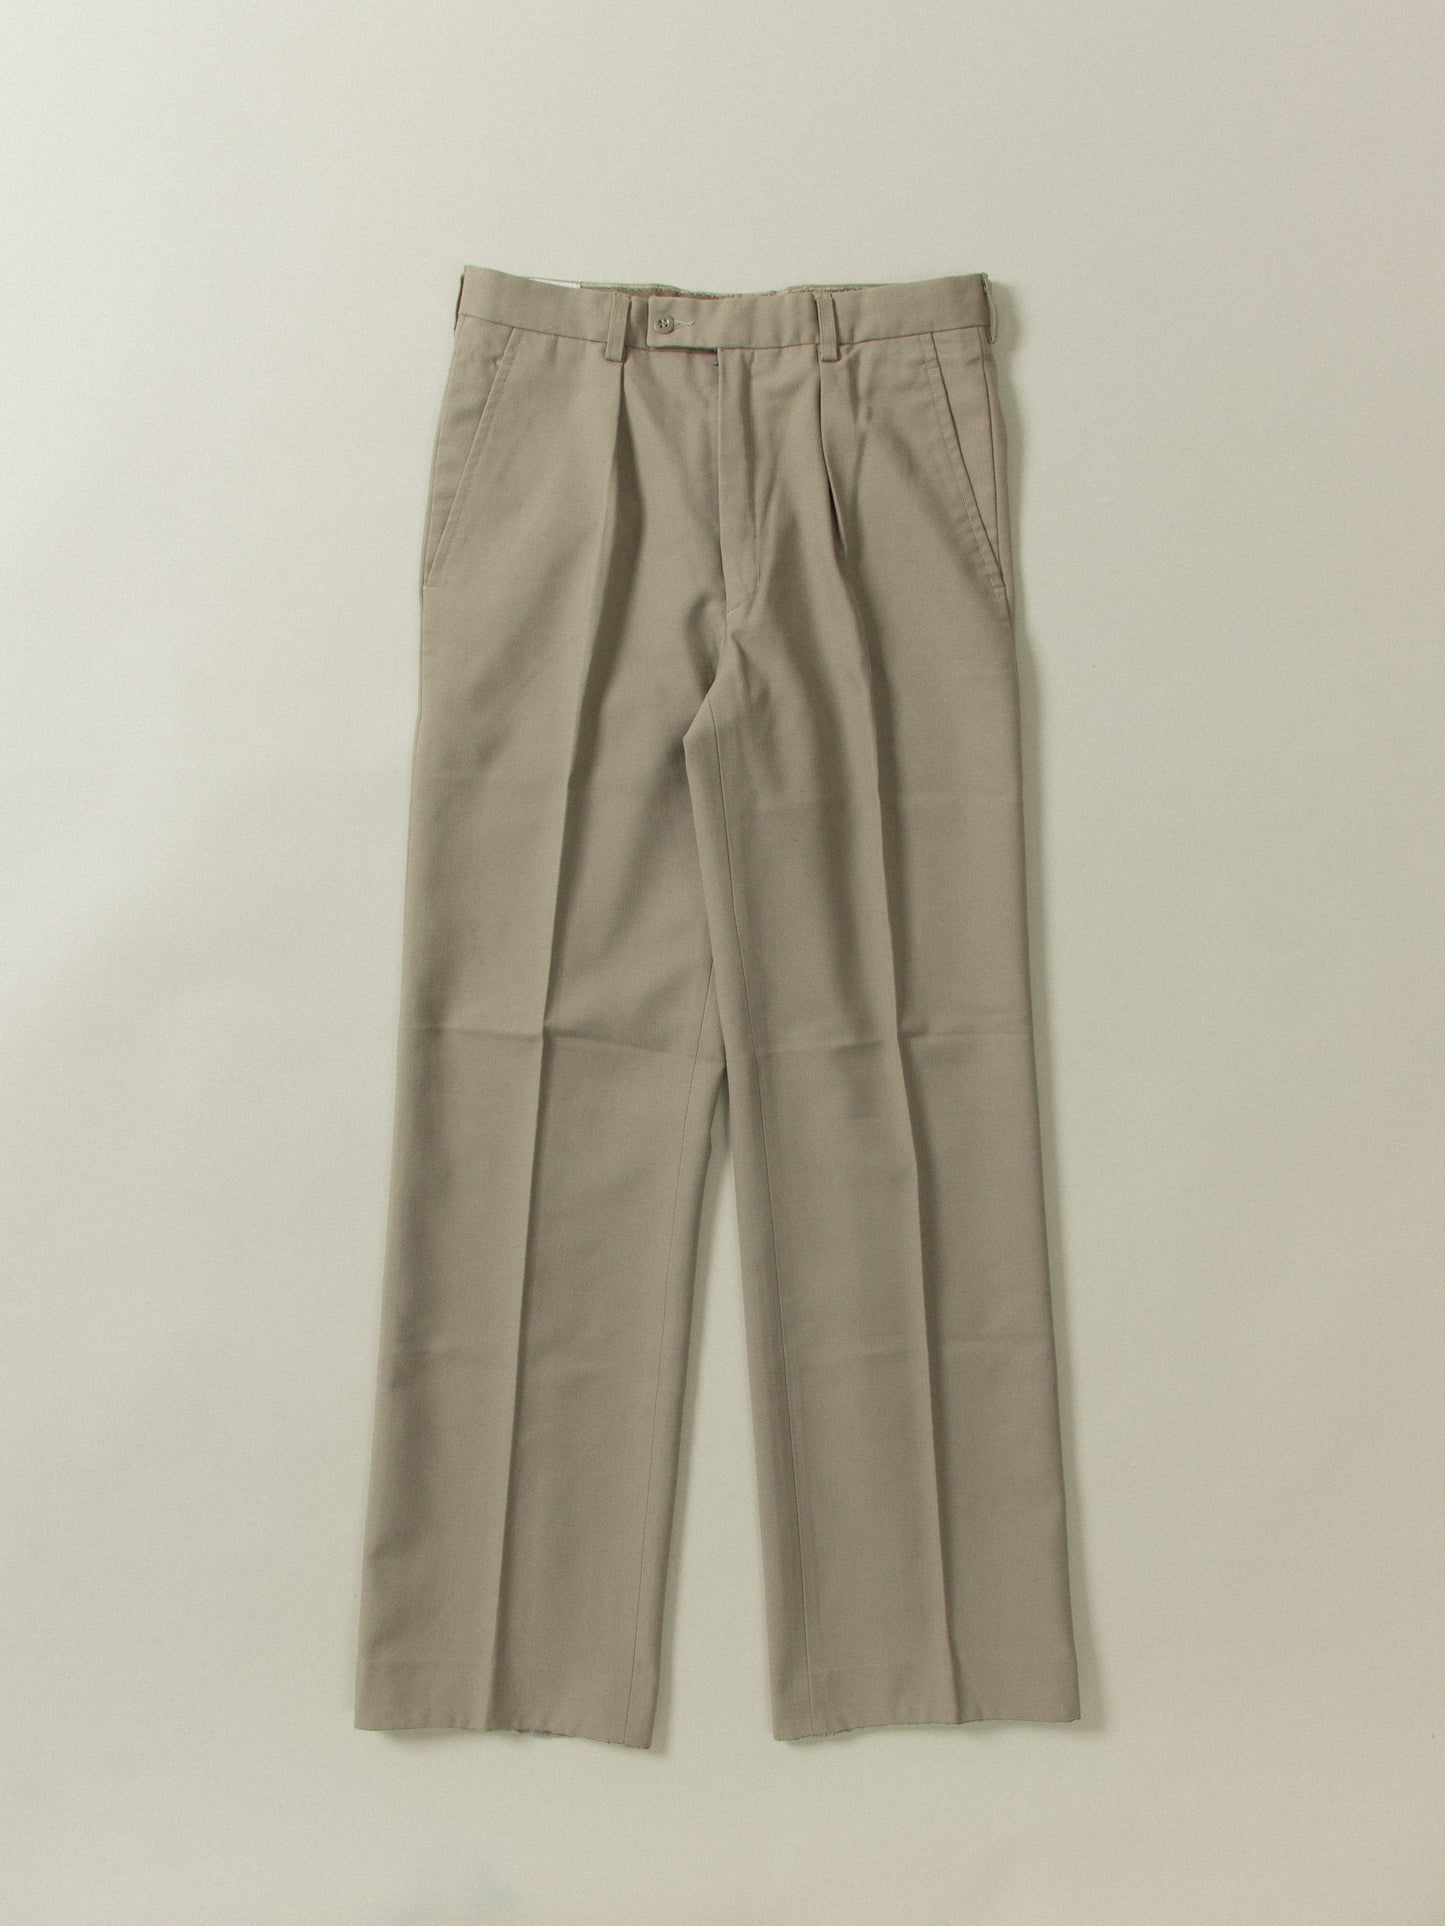 Vtg French Army Dress Trousers